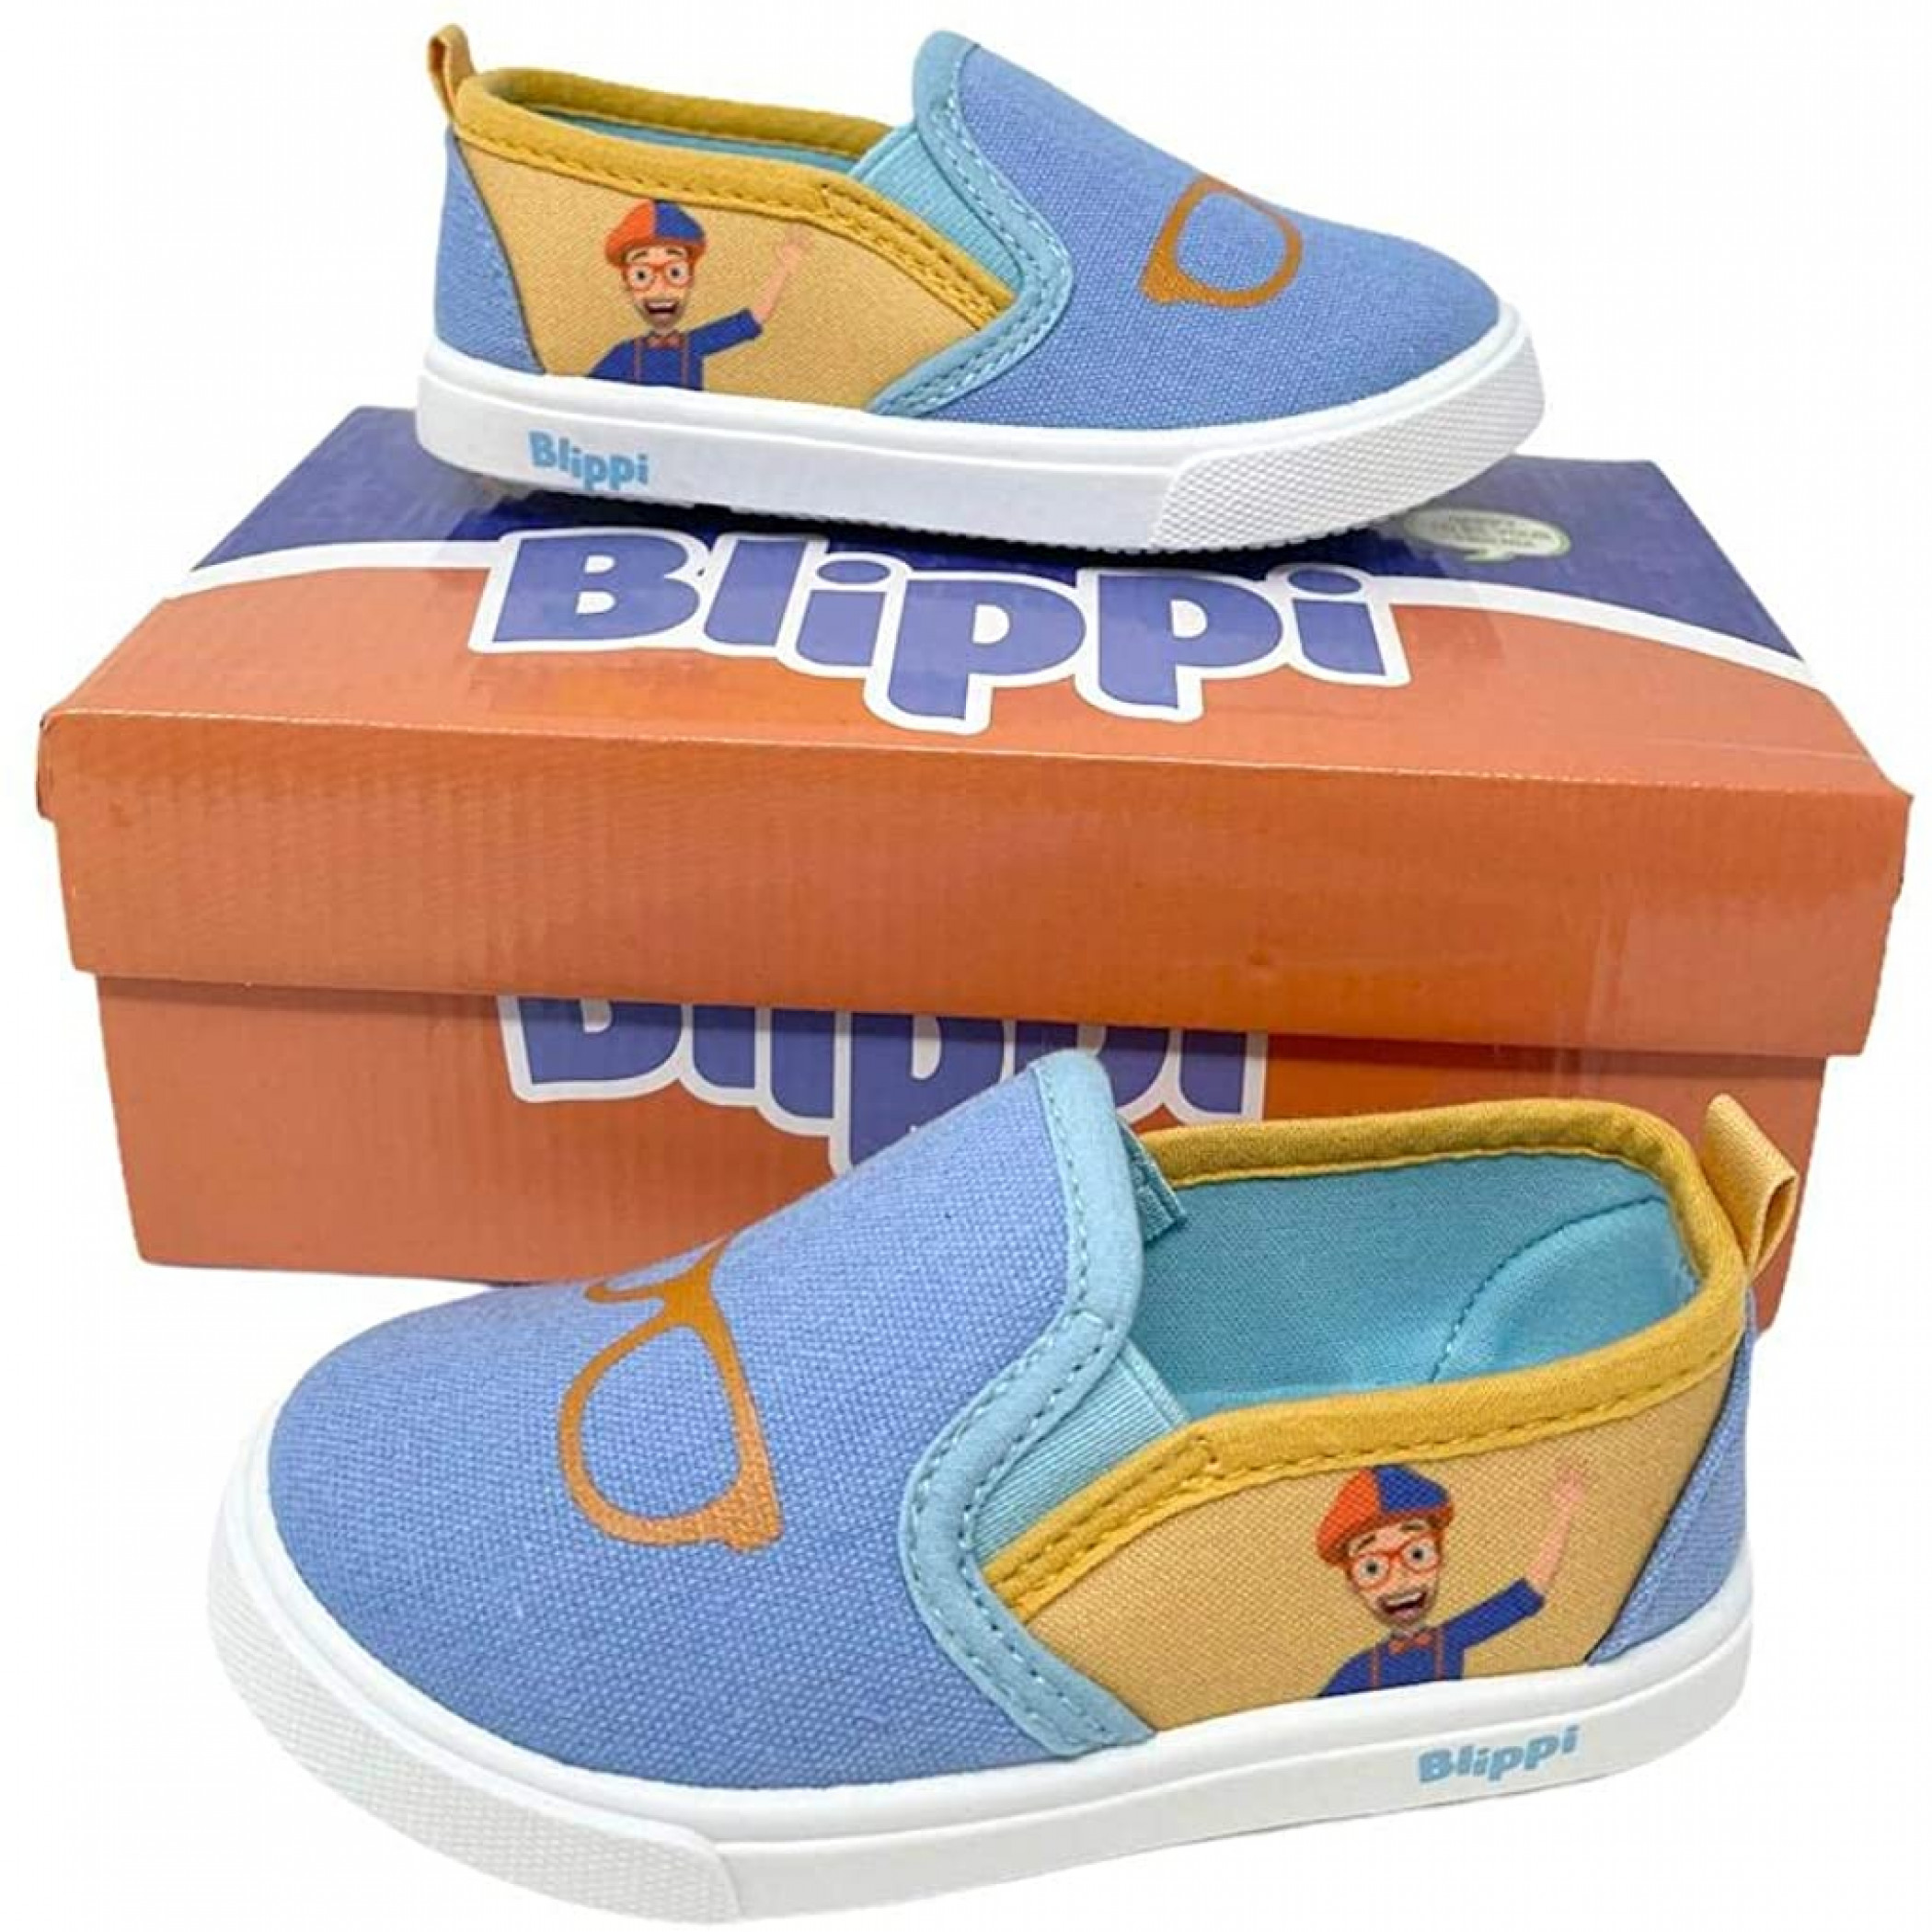 https://mmv2api.s3.us-east-2.amazonaws.com/products/images/Ground%20Up%20International%20Officially%20Licensed%20Blippi%20Kids%20Slip%20On%20Character%20Shoes-1.jpg